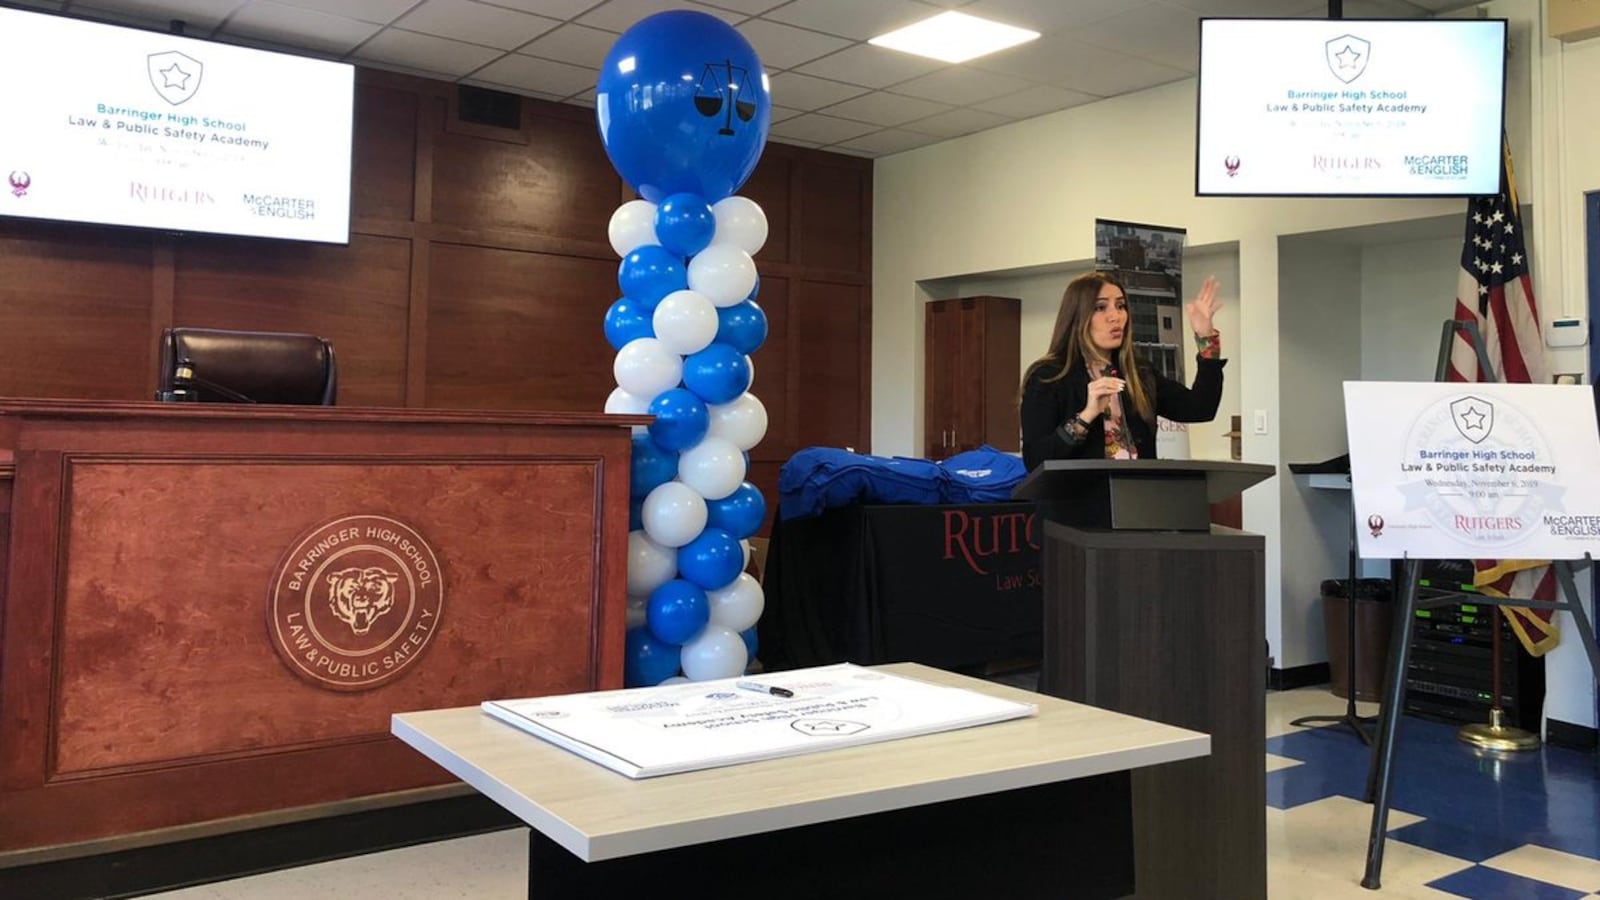 New Jersey State Sen. Teresa Ruiz spoke at the dedication of Barringer High School's new law academy, which features a judge's box built by carpentry students.